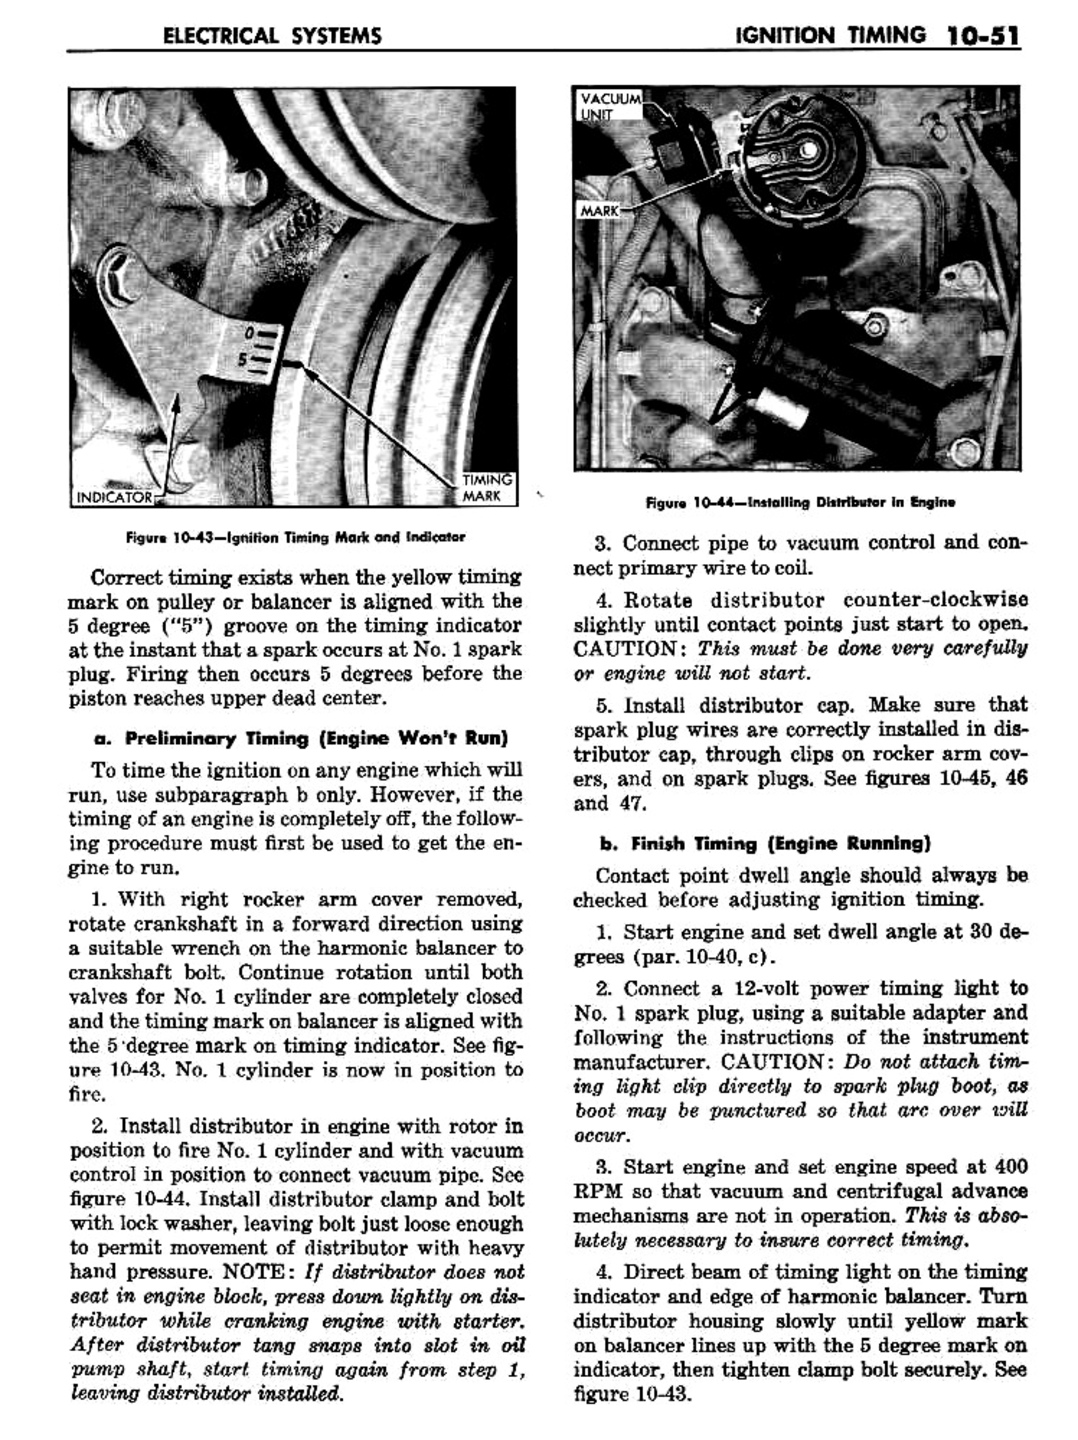 n_11 1957 Buick Shop Manual - Electrical Systems-051-051.jpg